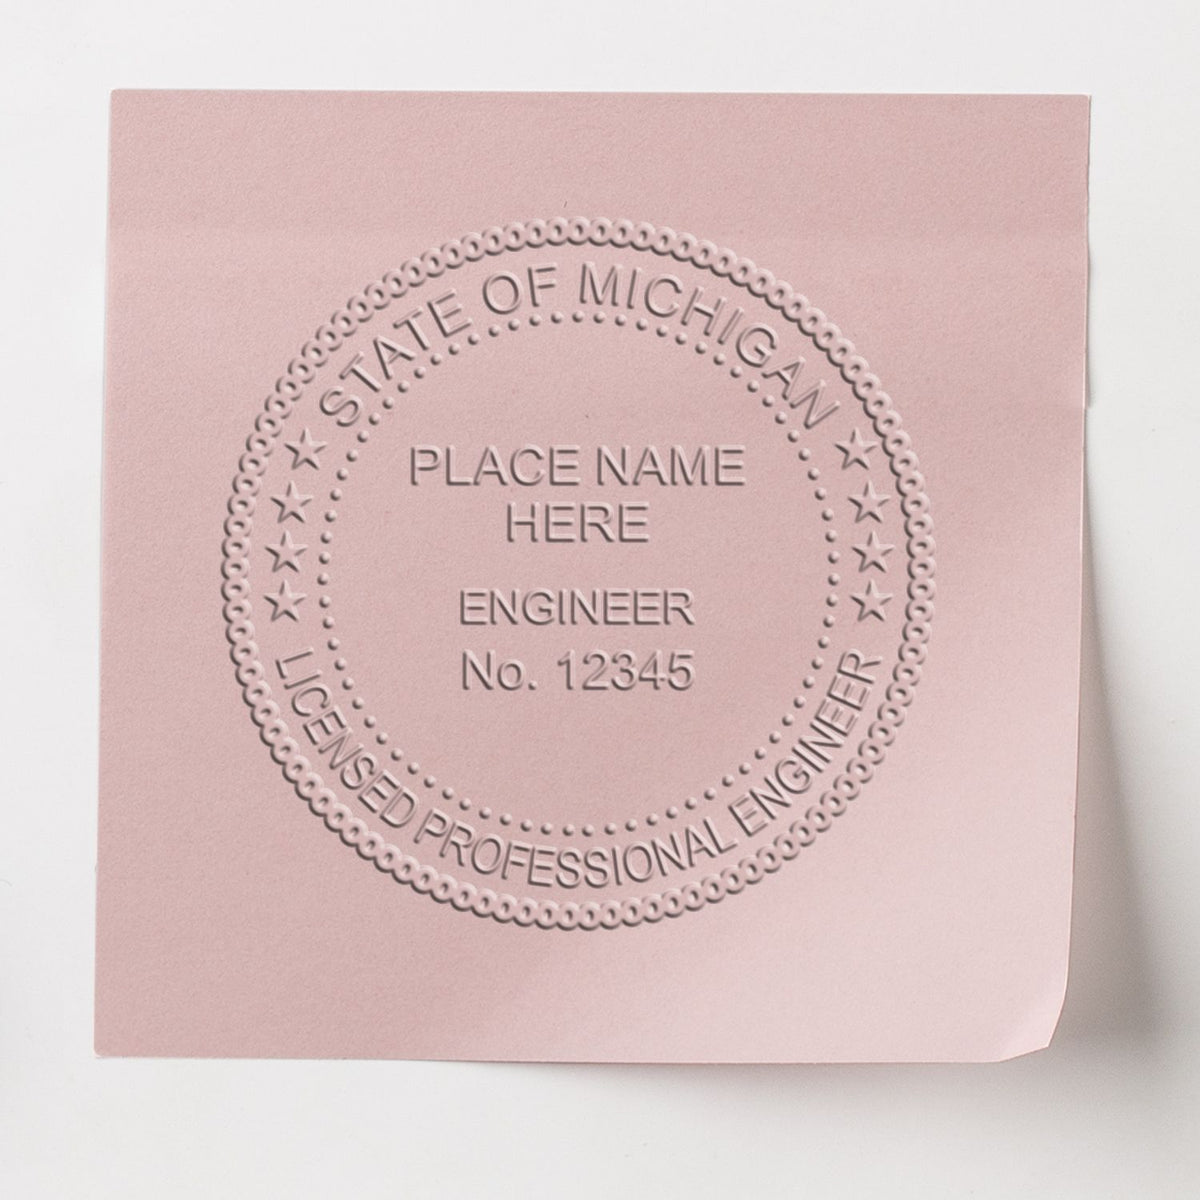 An alternative view of the Hybrid Michigan Engineer Seal stamped on a sheet of paper showing the image in use